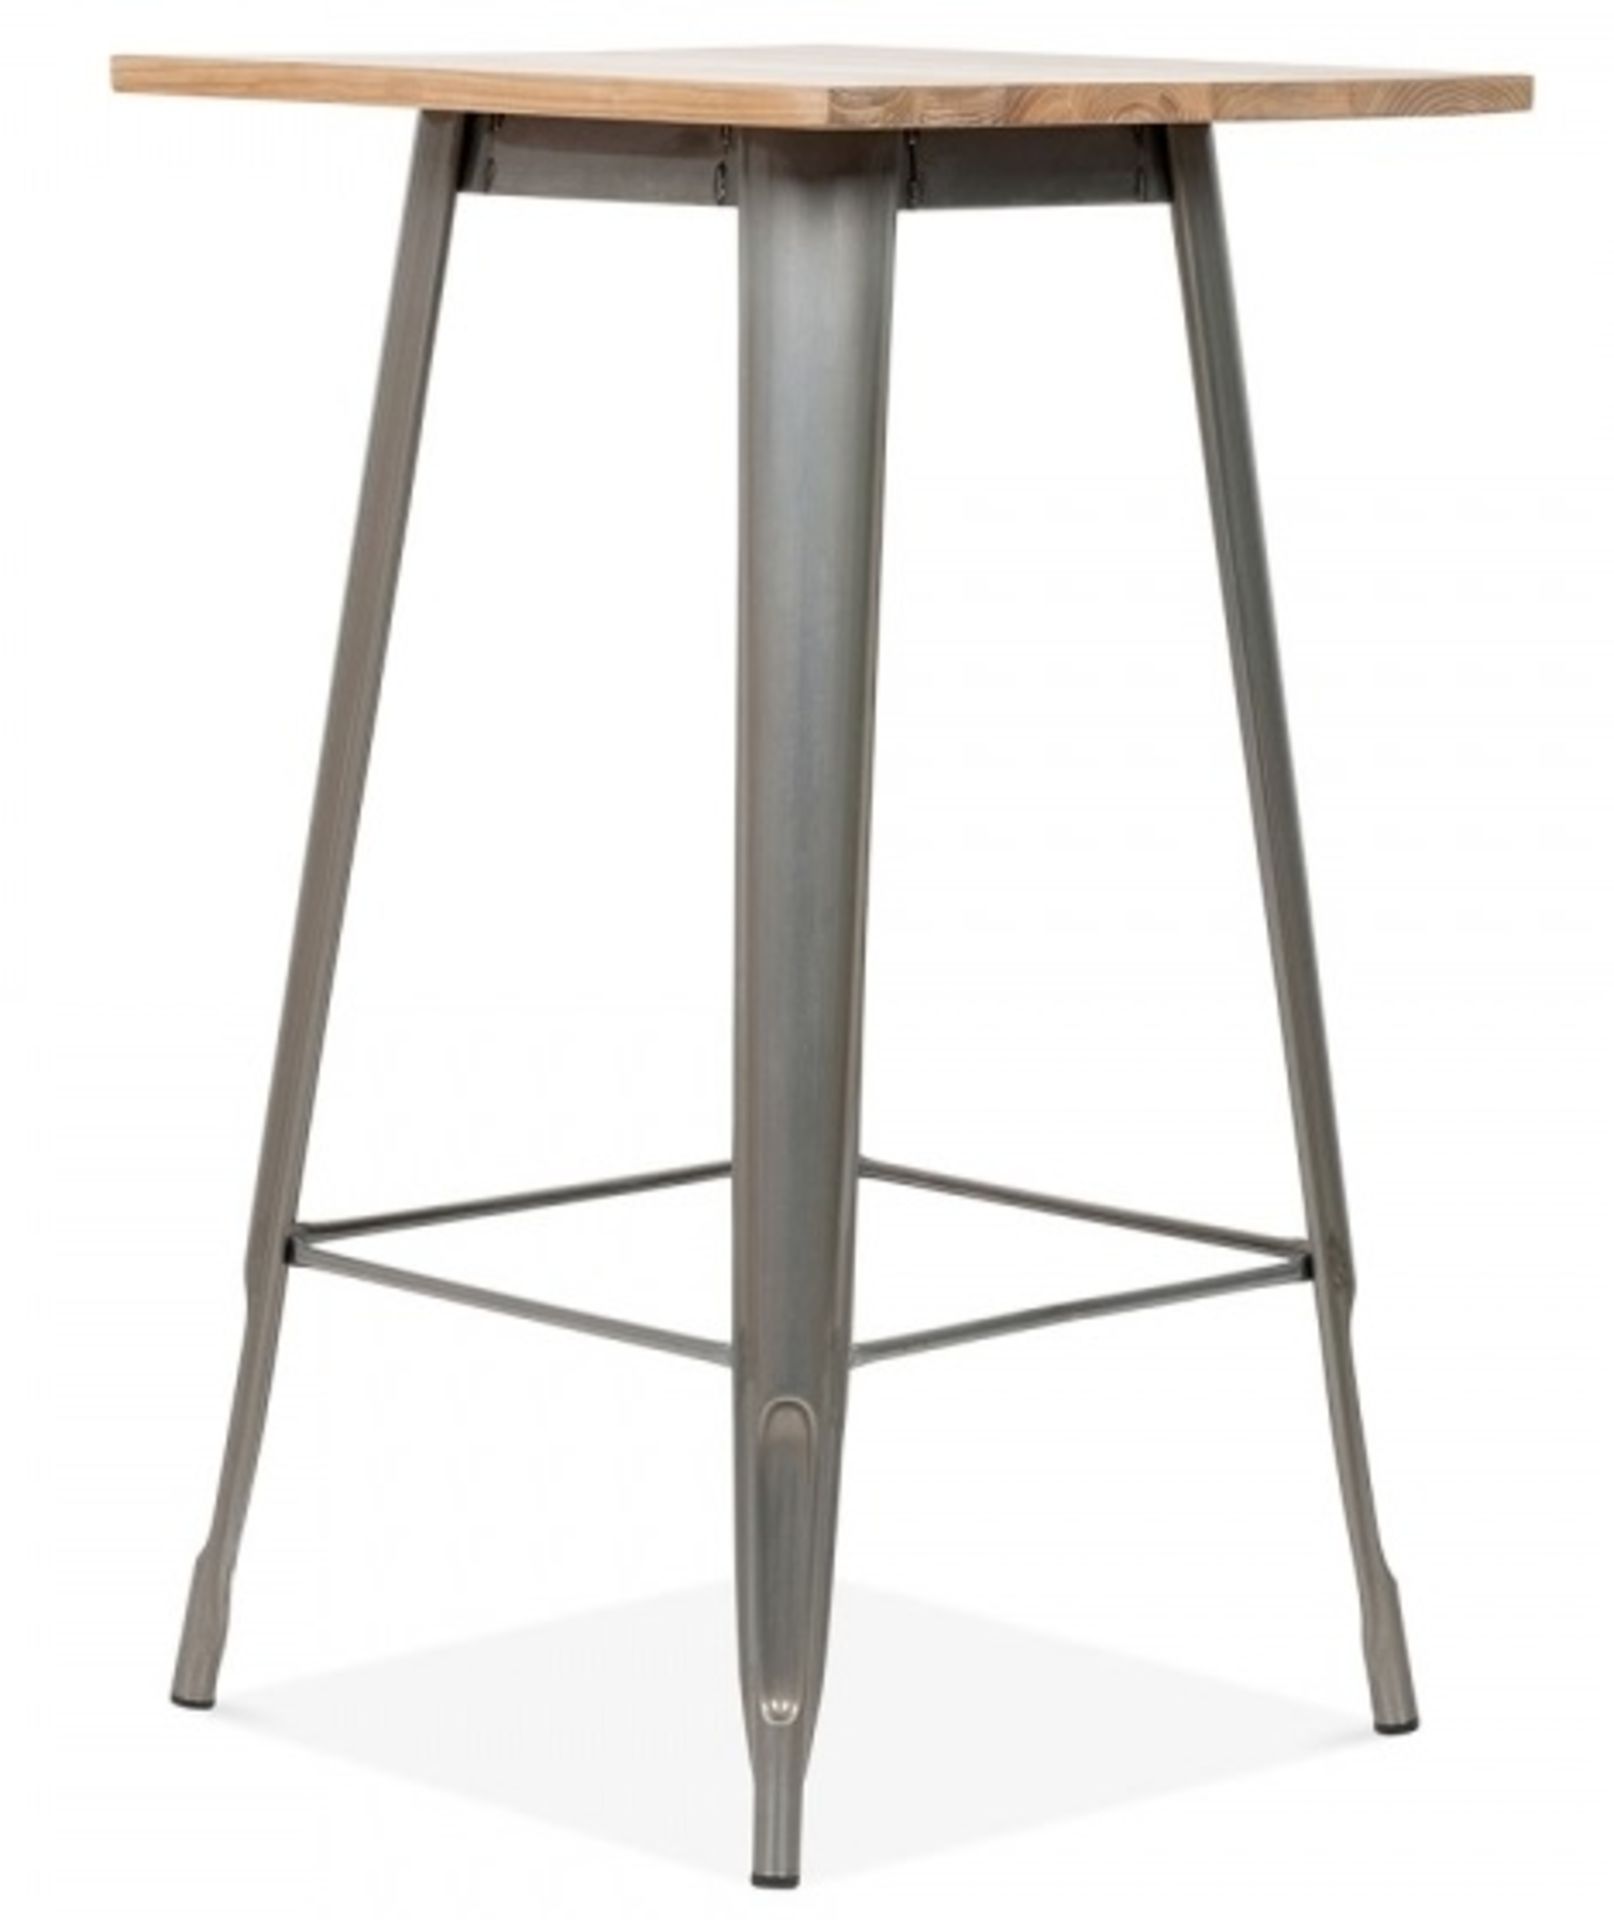 1 x Xavier Pauchard / Tolix Inspired Industrial Metal Bar Table - COPPER With Natural Wood Top - Image 2 of 5